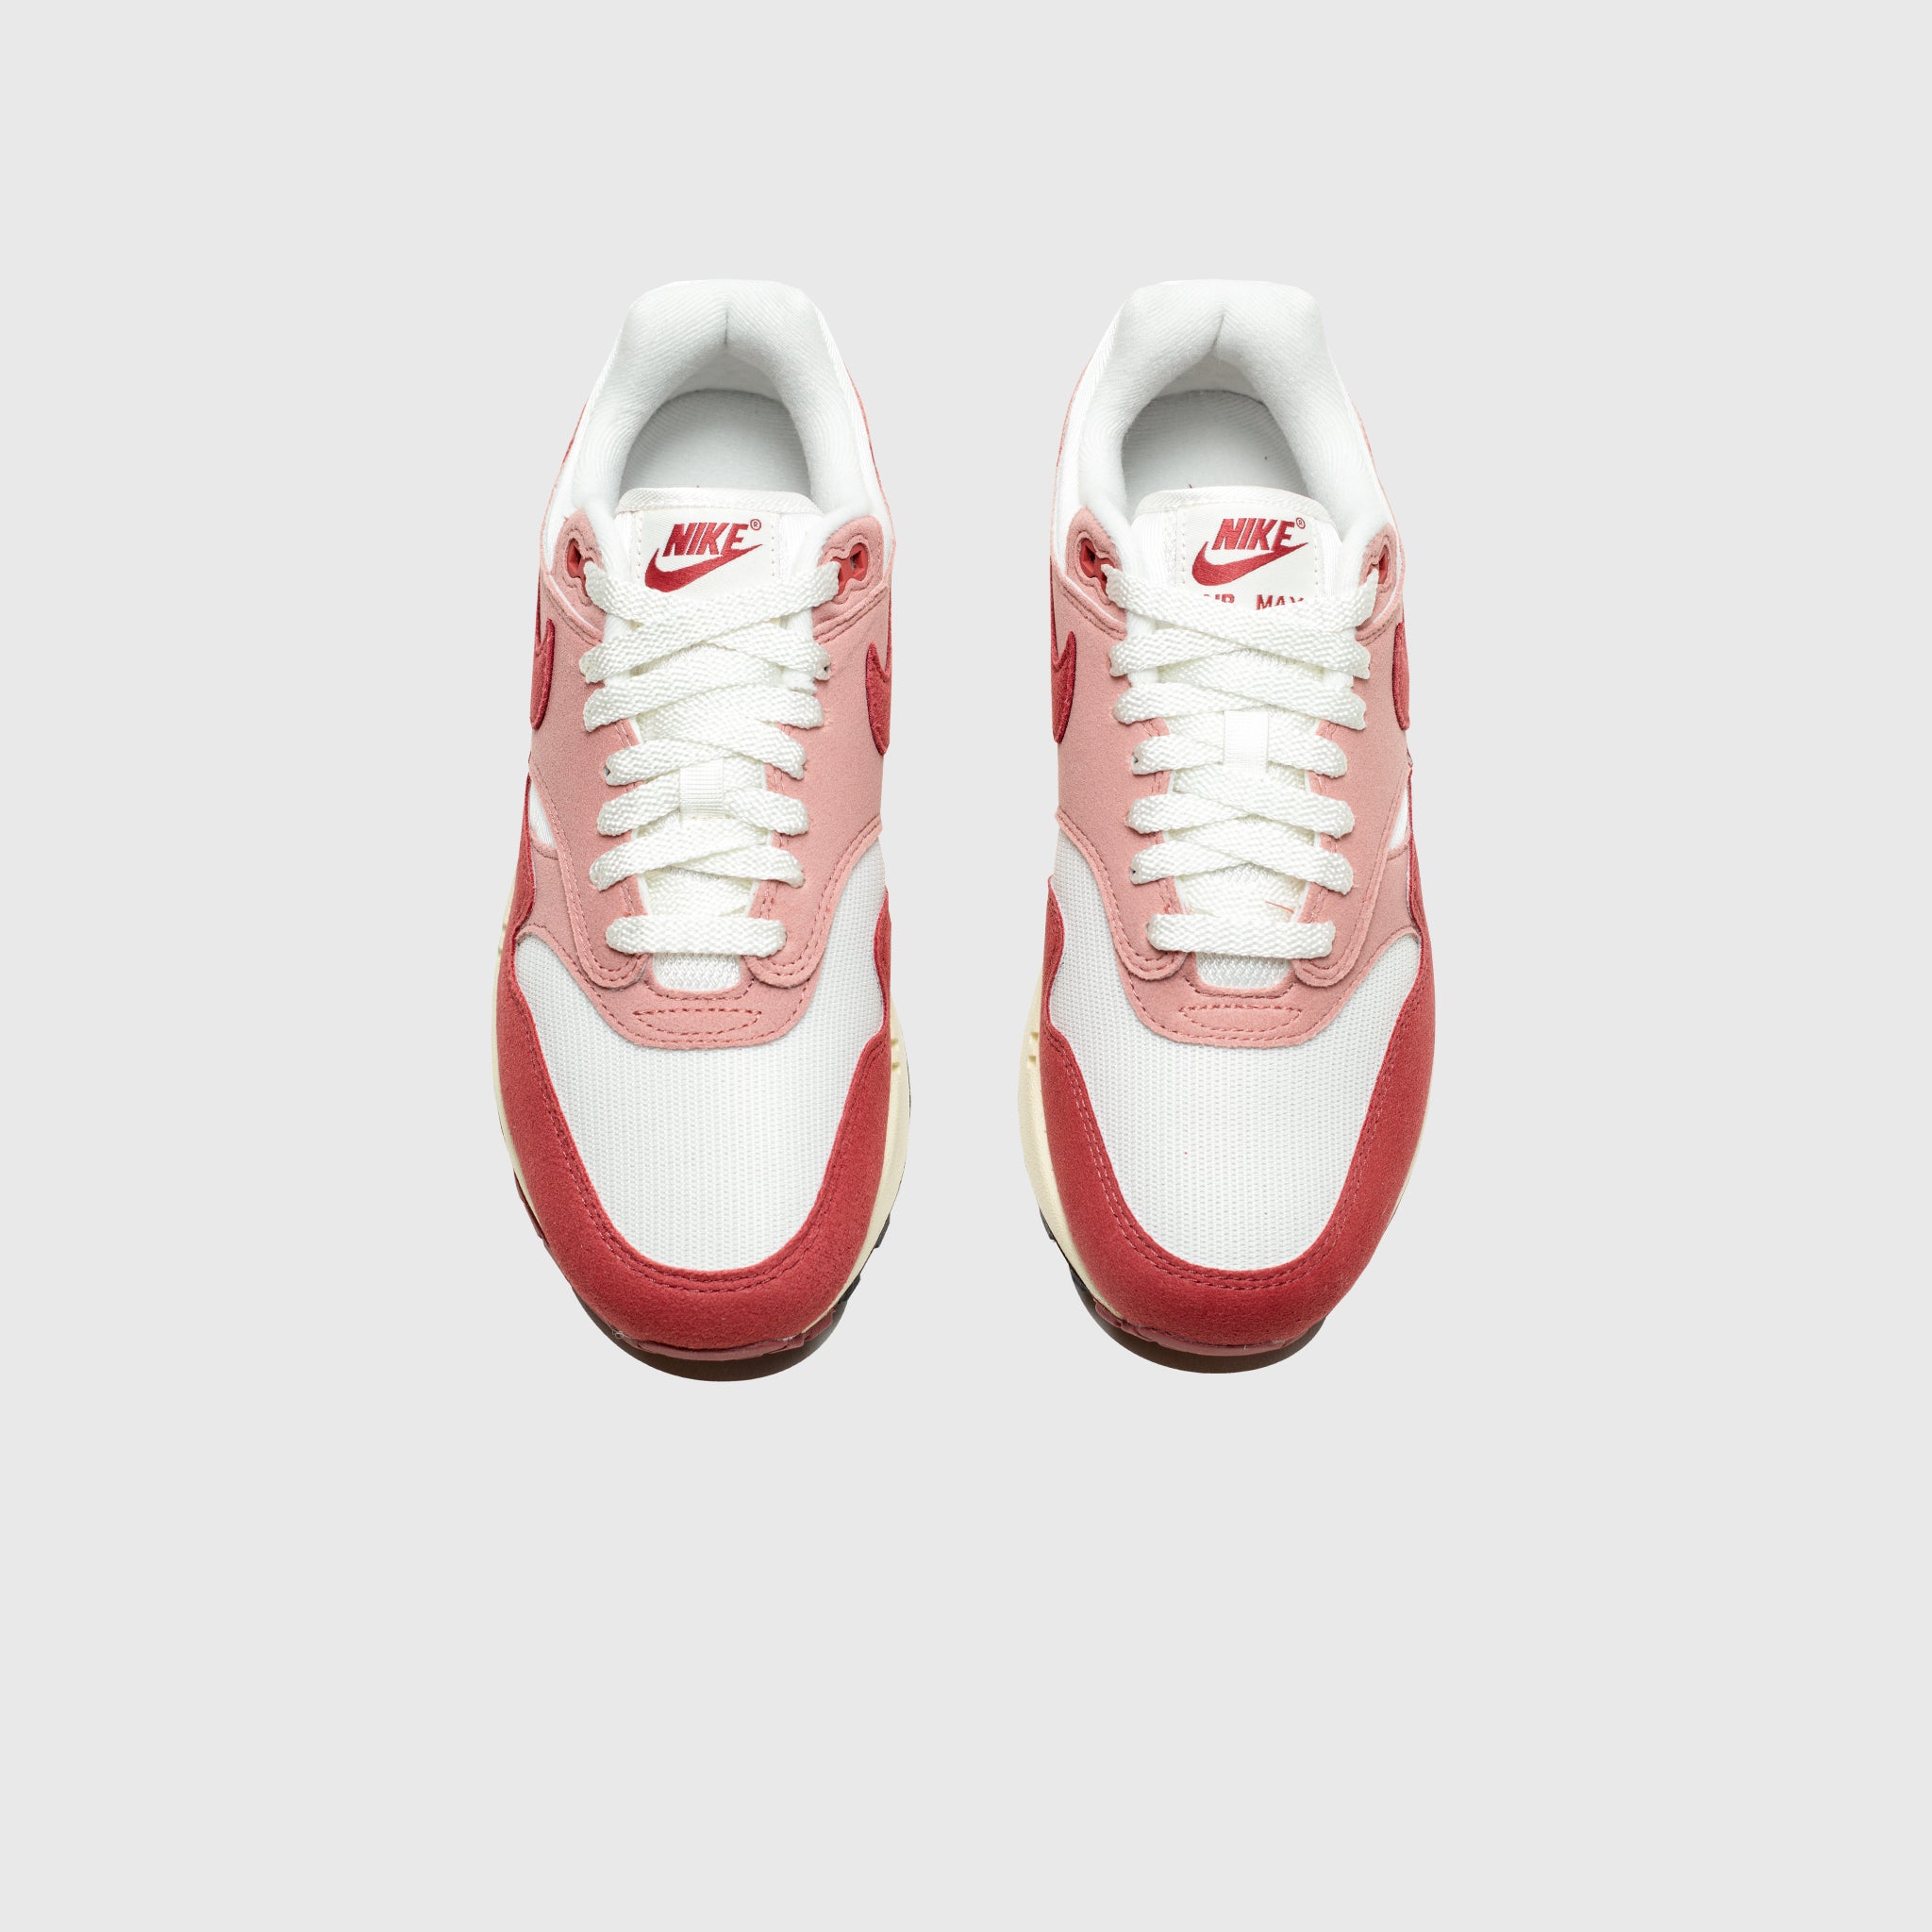 WMNS AIR MAX 1 "RED STARDUST"